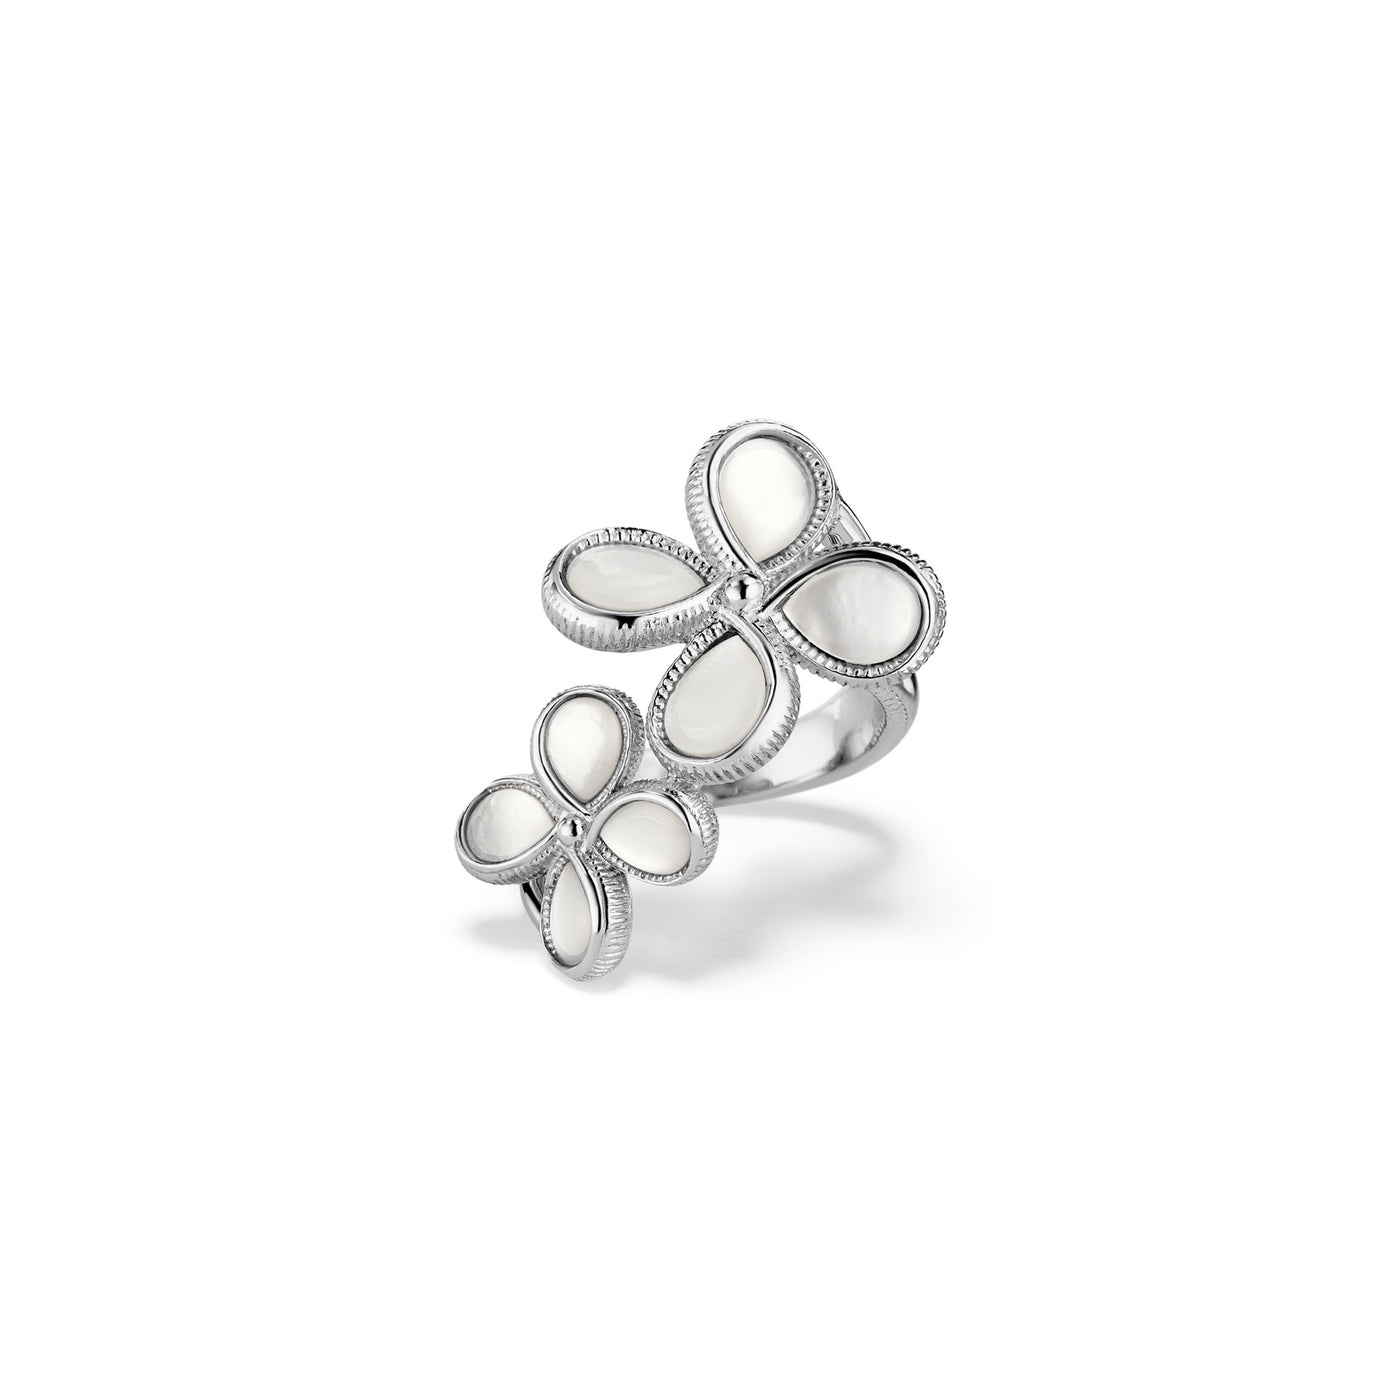 Double Flower Ring with Mother of Pearl